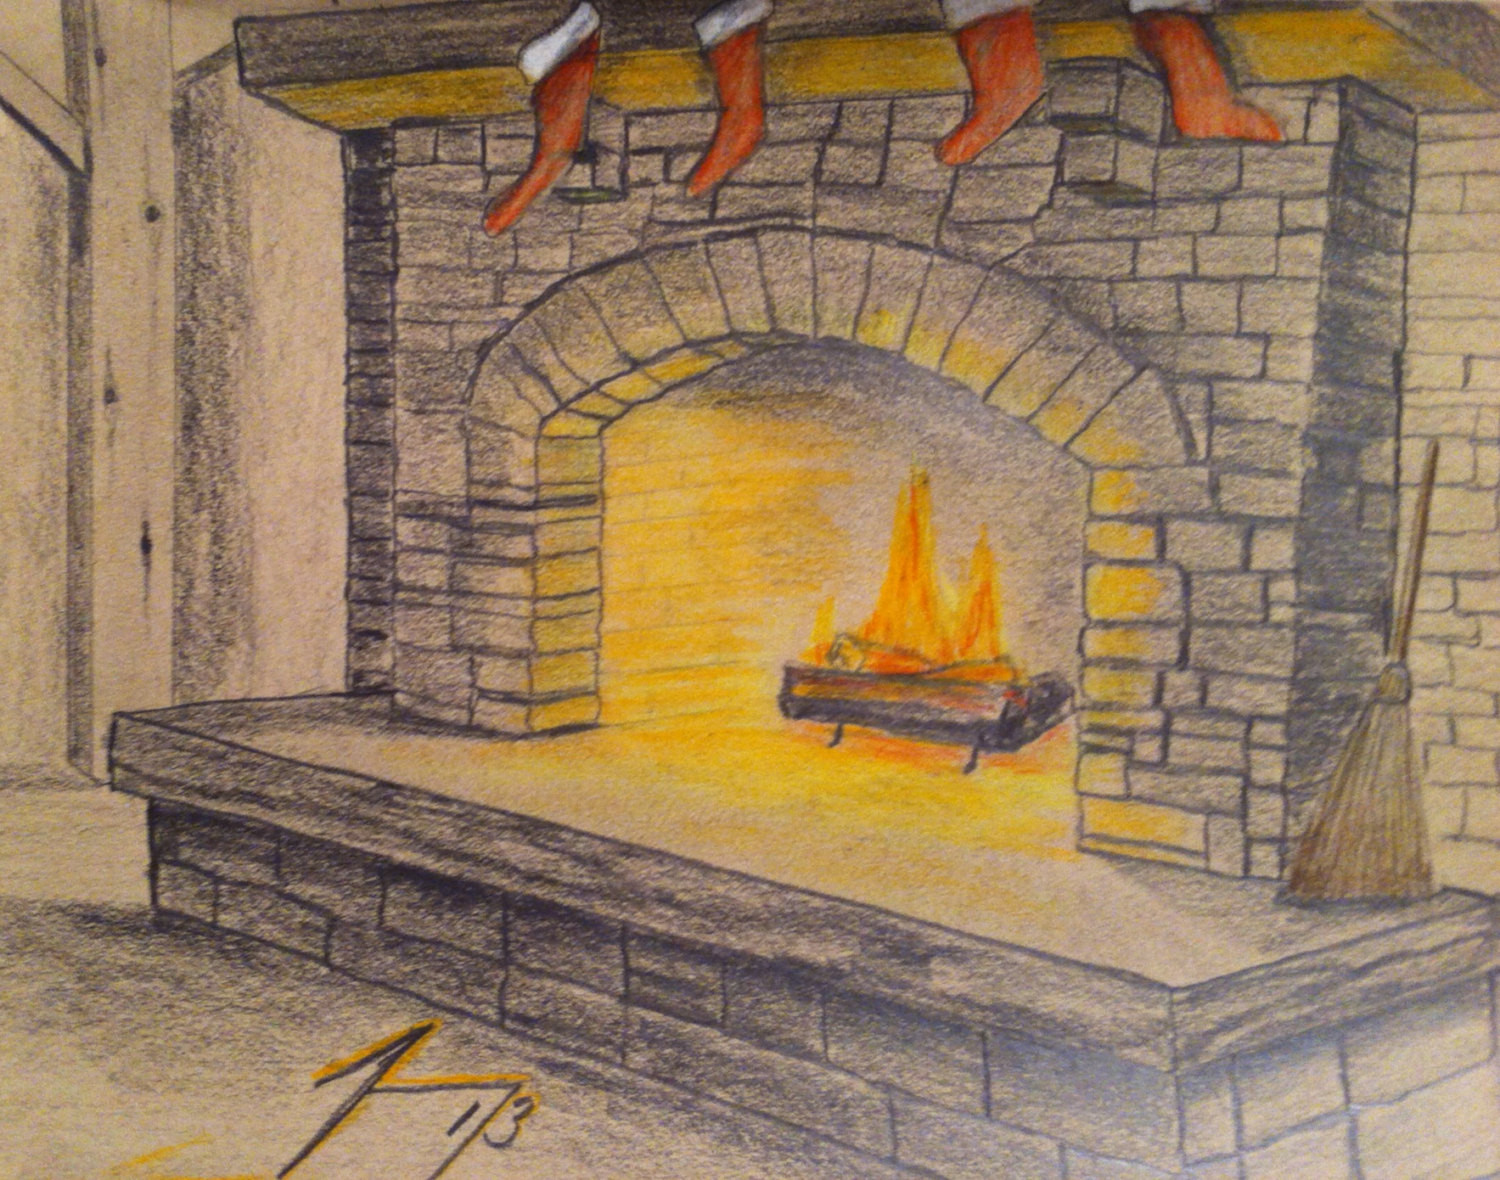 Christmas Fireplace Drawings
 Warm Holiday Fireplace Original Framed Drawing by